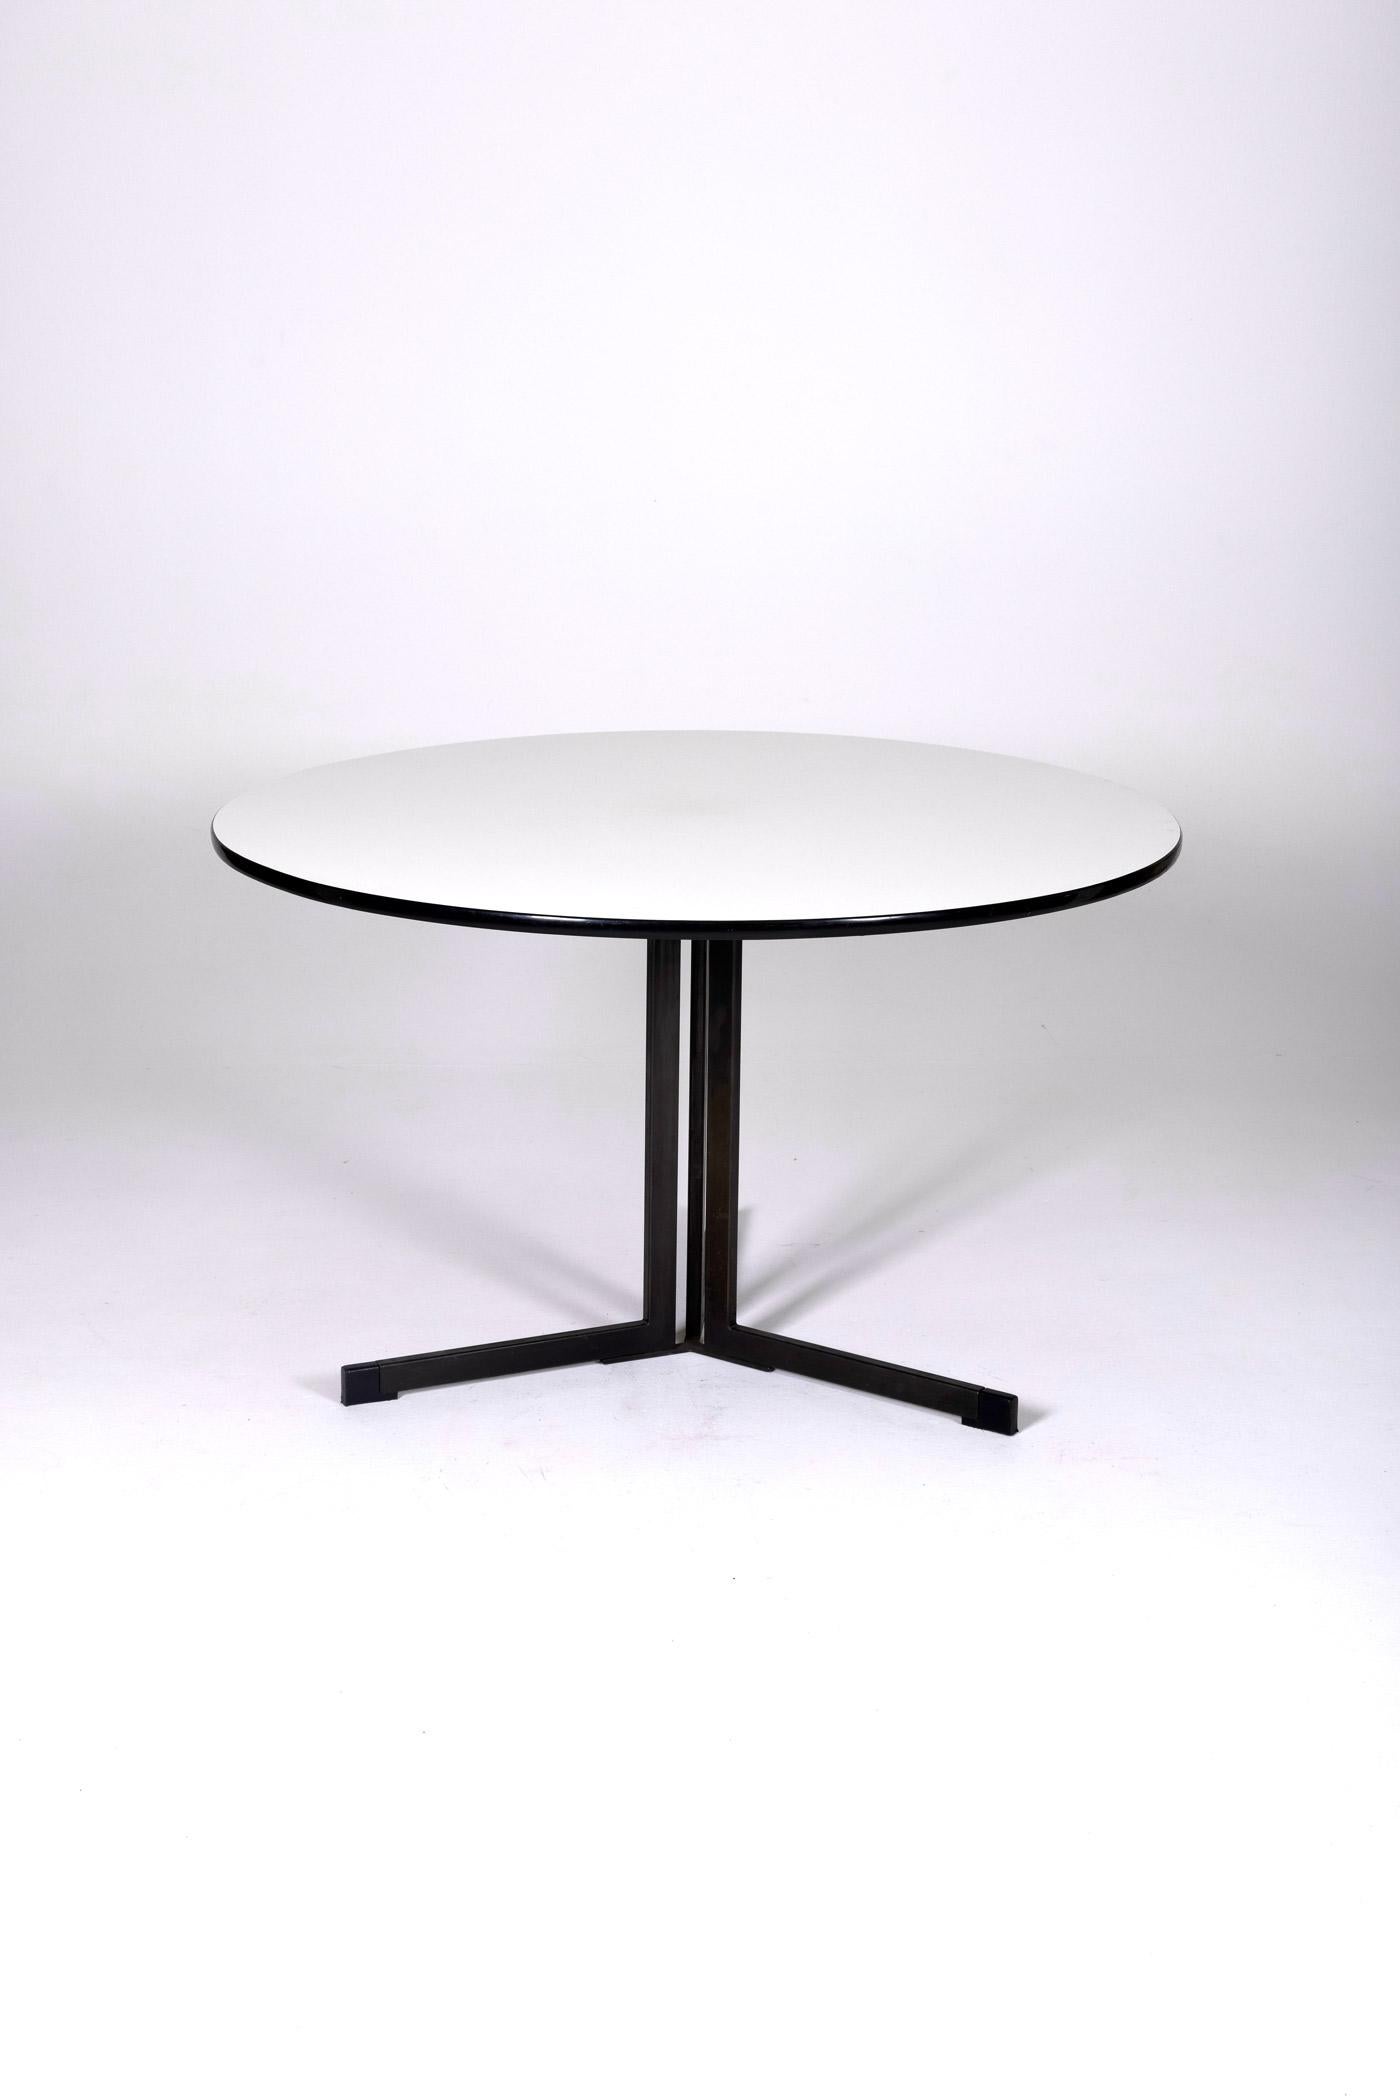 Round dining table, model AP103, by Dutch designer Hein Salomonson, published by Ap Originals in the 1950s. The tabletop is in white melamine, and the base is in black lacquered metal. In very good condition.
DV188